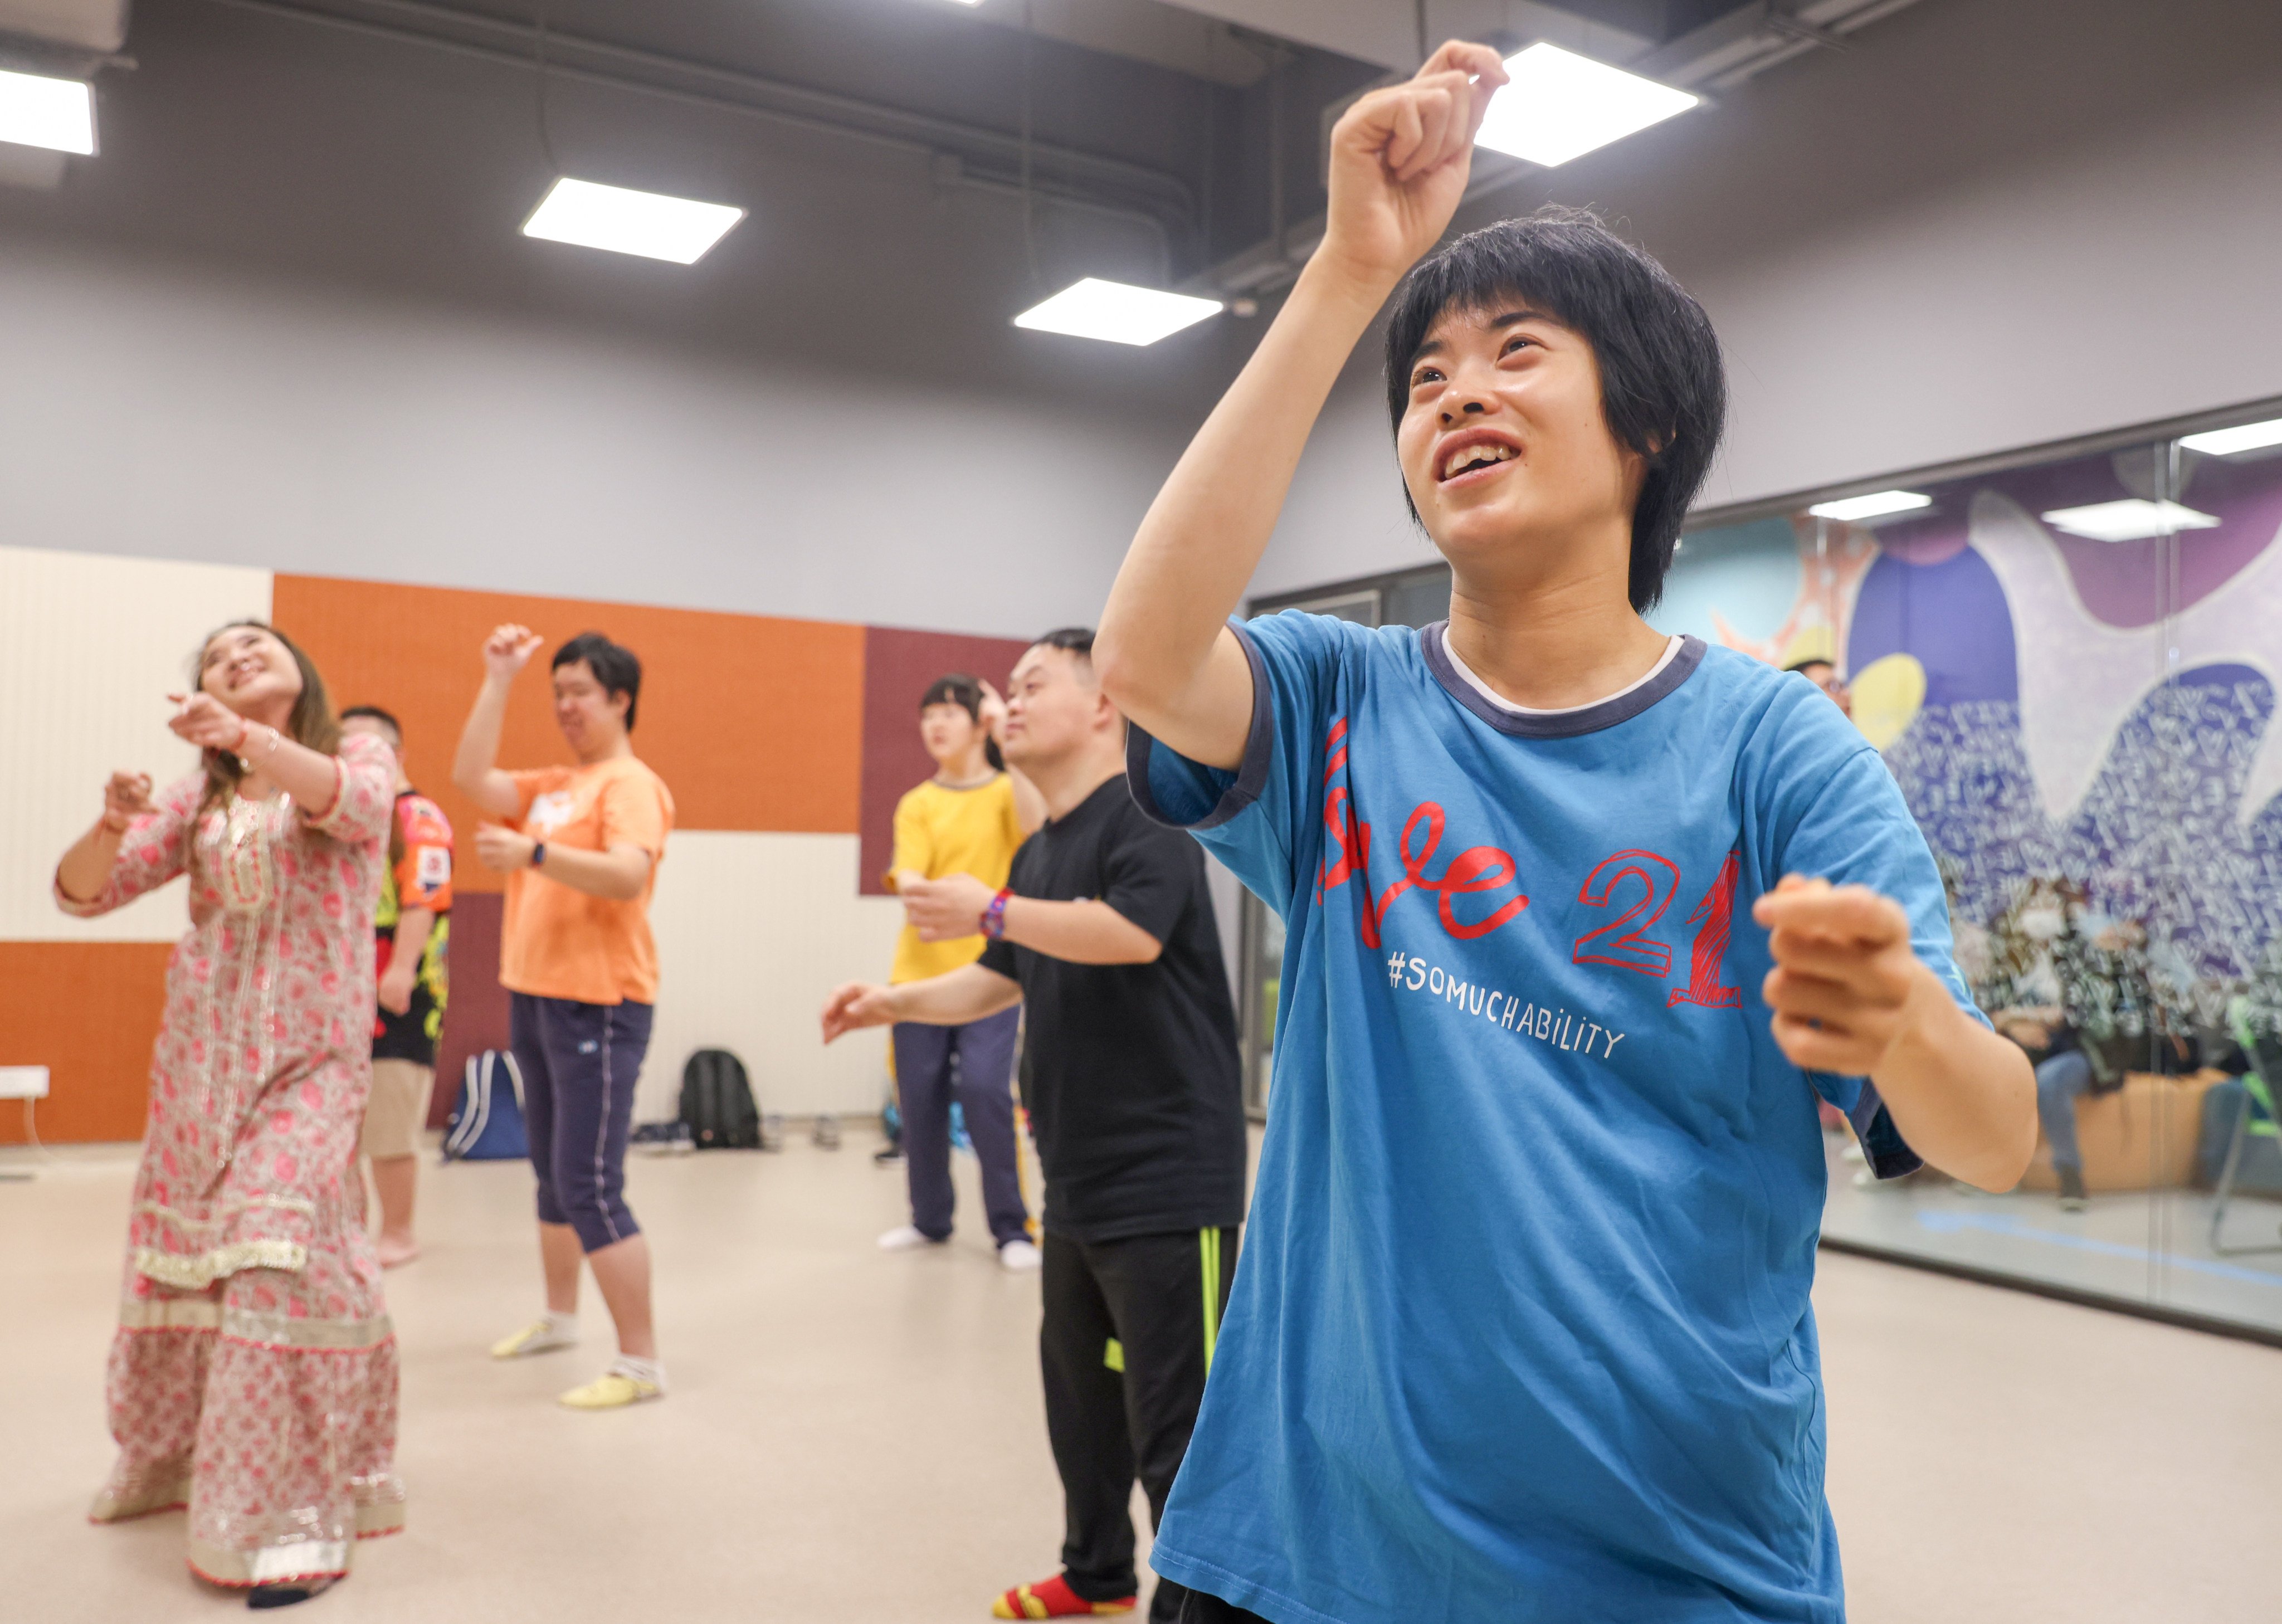 The Love 21 Foundation empowers the neurodiverse community through sports, art, nutrition and mental health support programmes free of charge. Photo: Yik Yeung-man